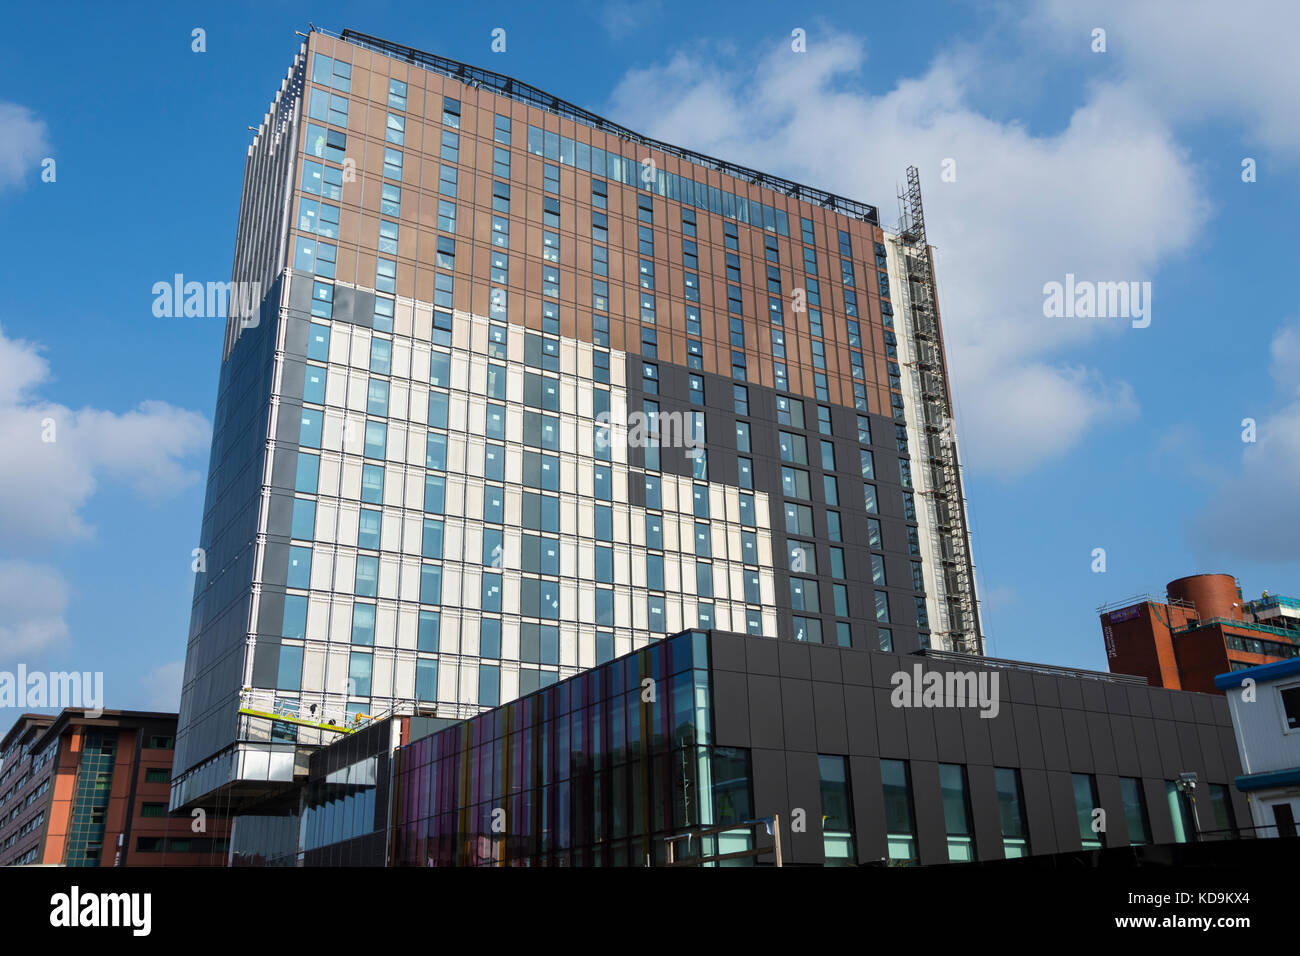 The Crowne Plaza and Staybridge Suites hotel building under construction, Manchester University Campus, Manchester, UK Stock Photo